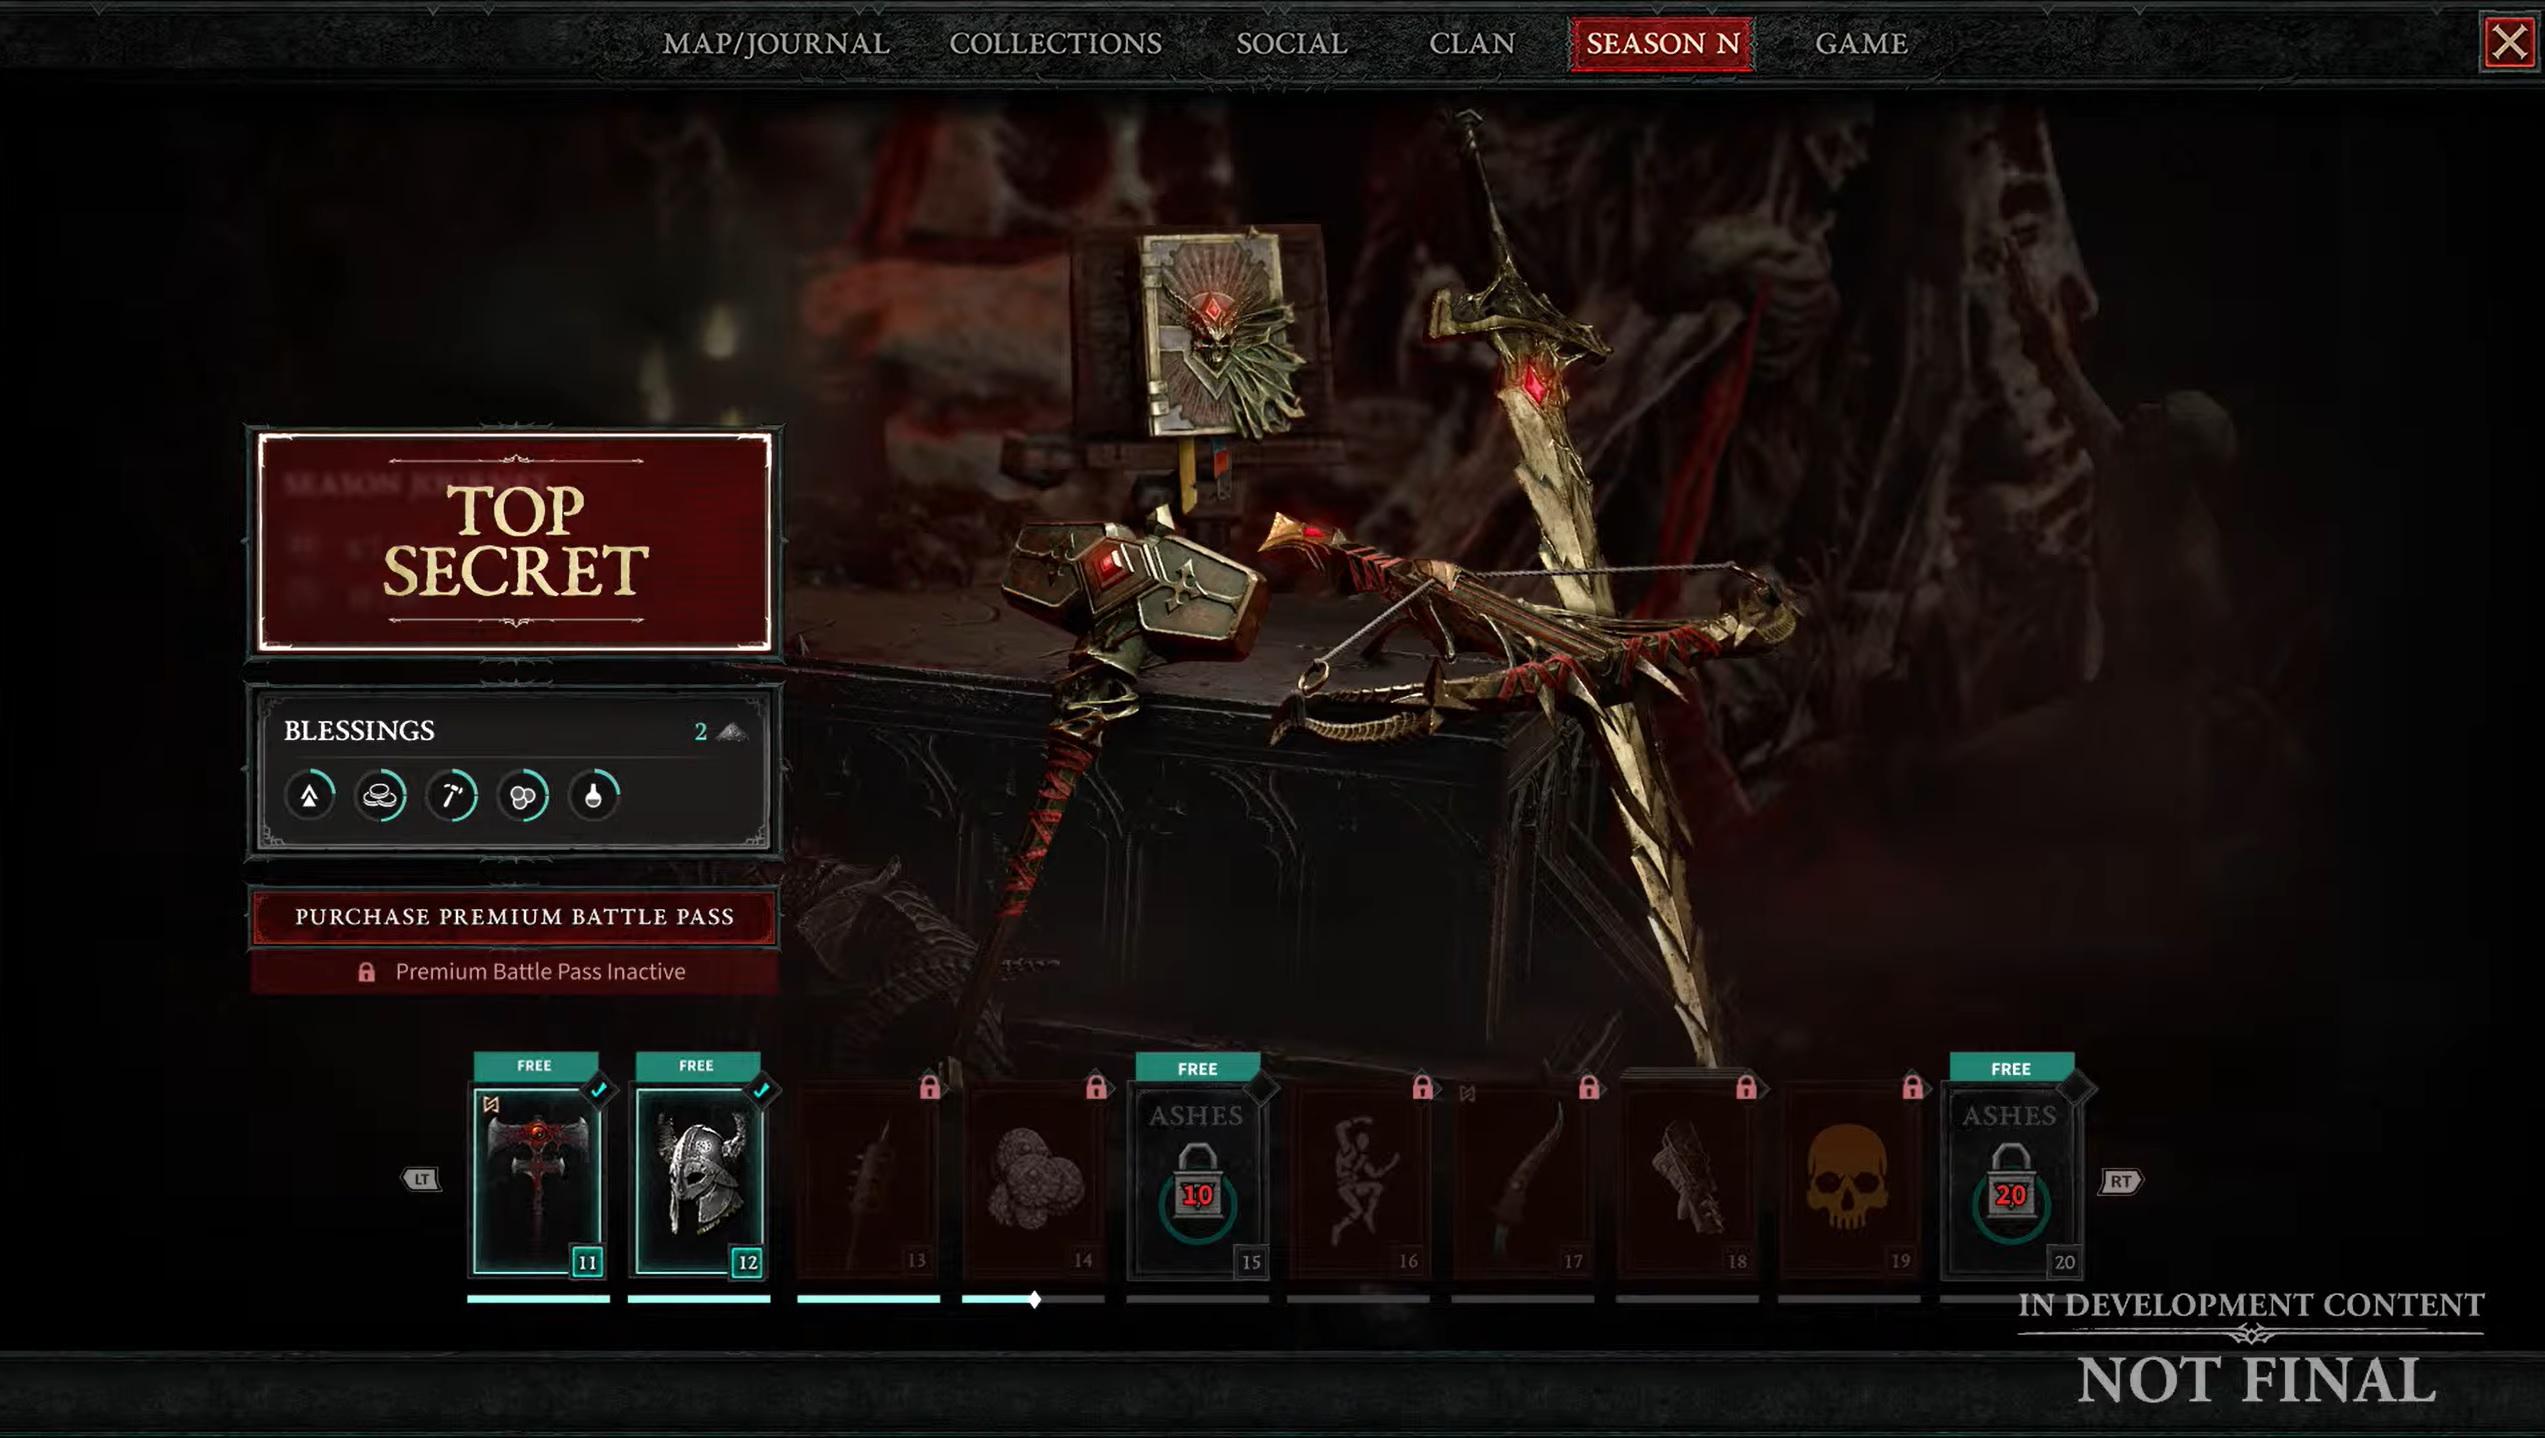 The Diablo IV Battle Pass highlighting the Premium and Free tiers.